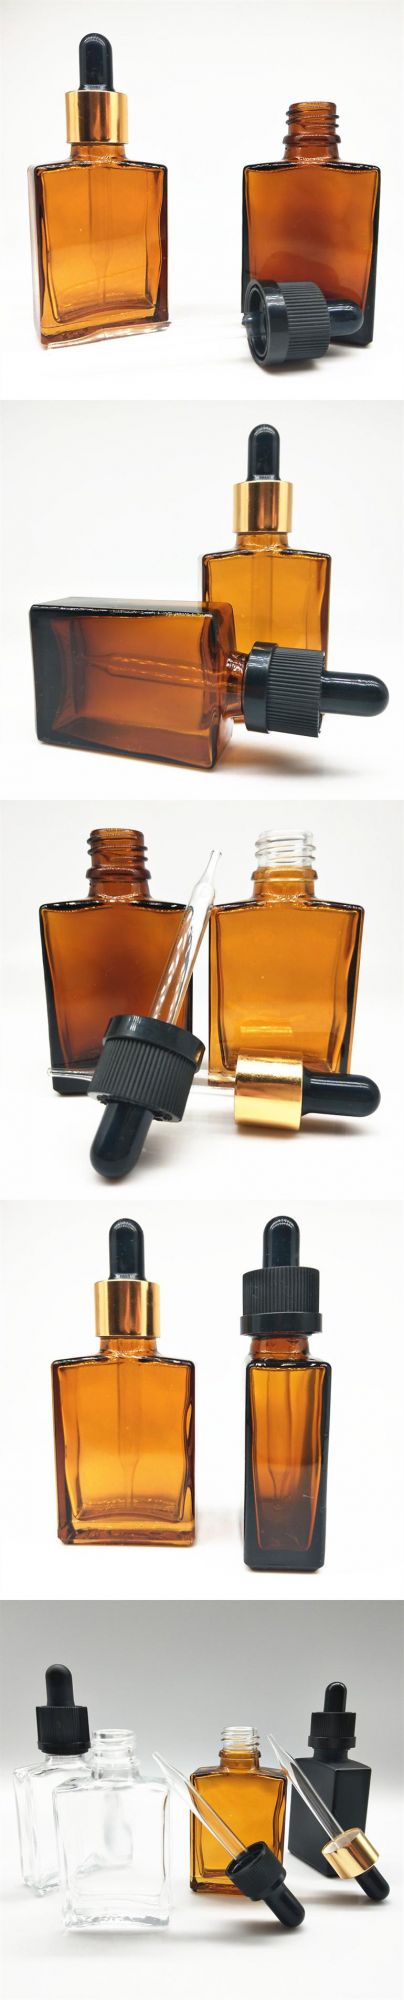 Wholesal 30ml Flat Square Amber Glass Essential Oil Dropper Bottle